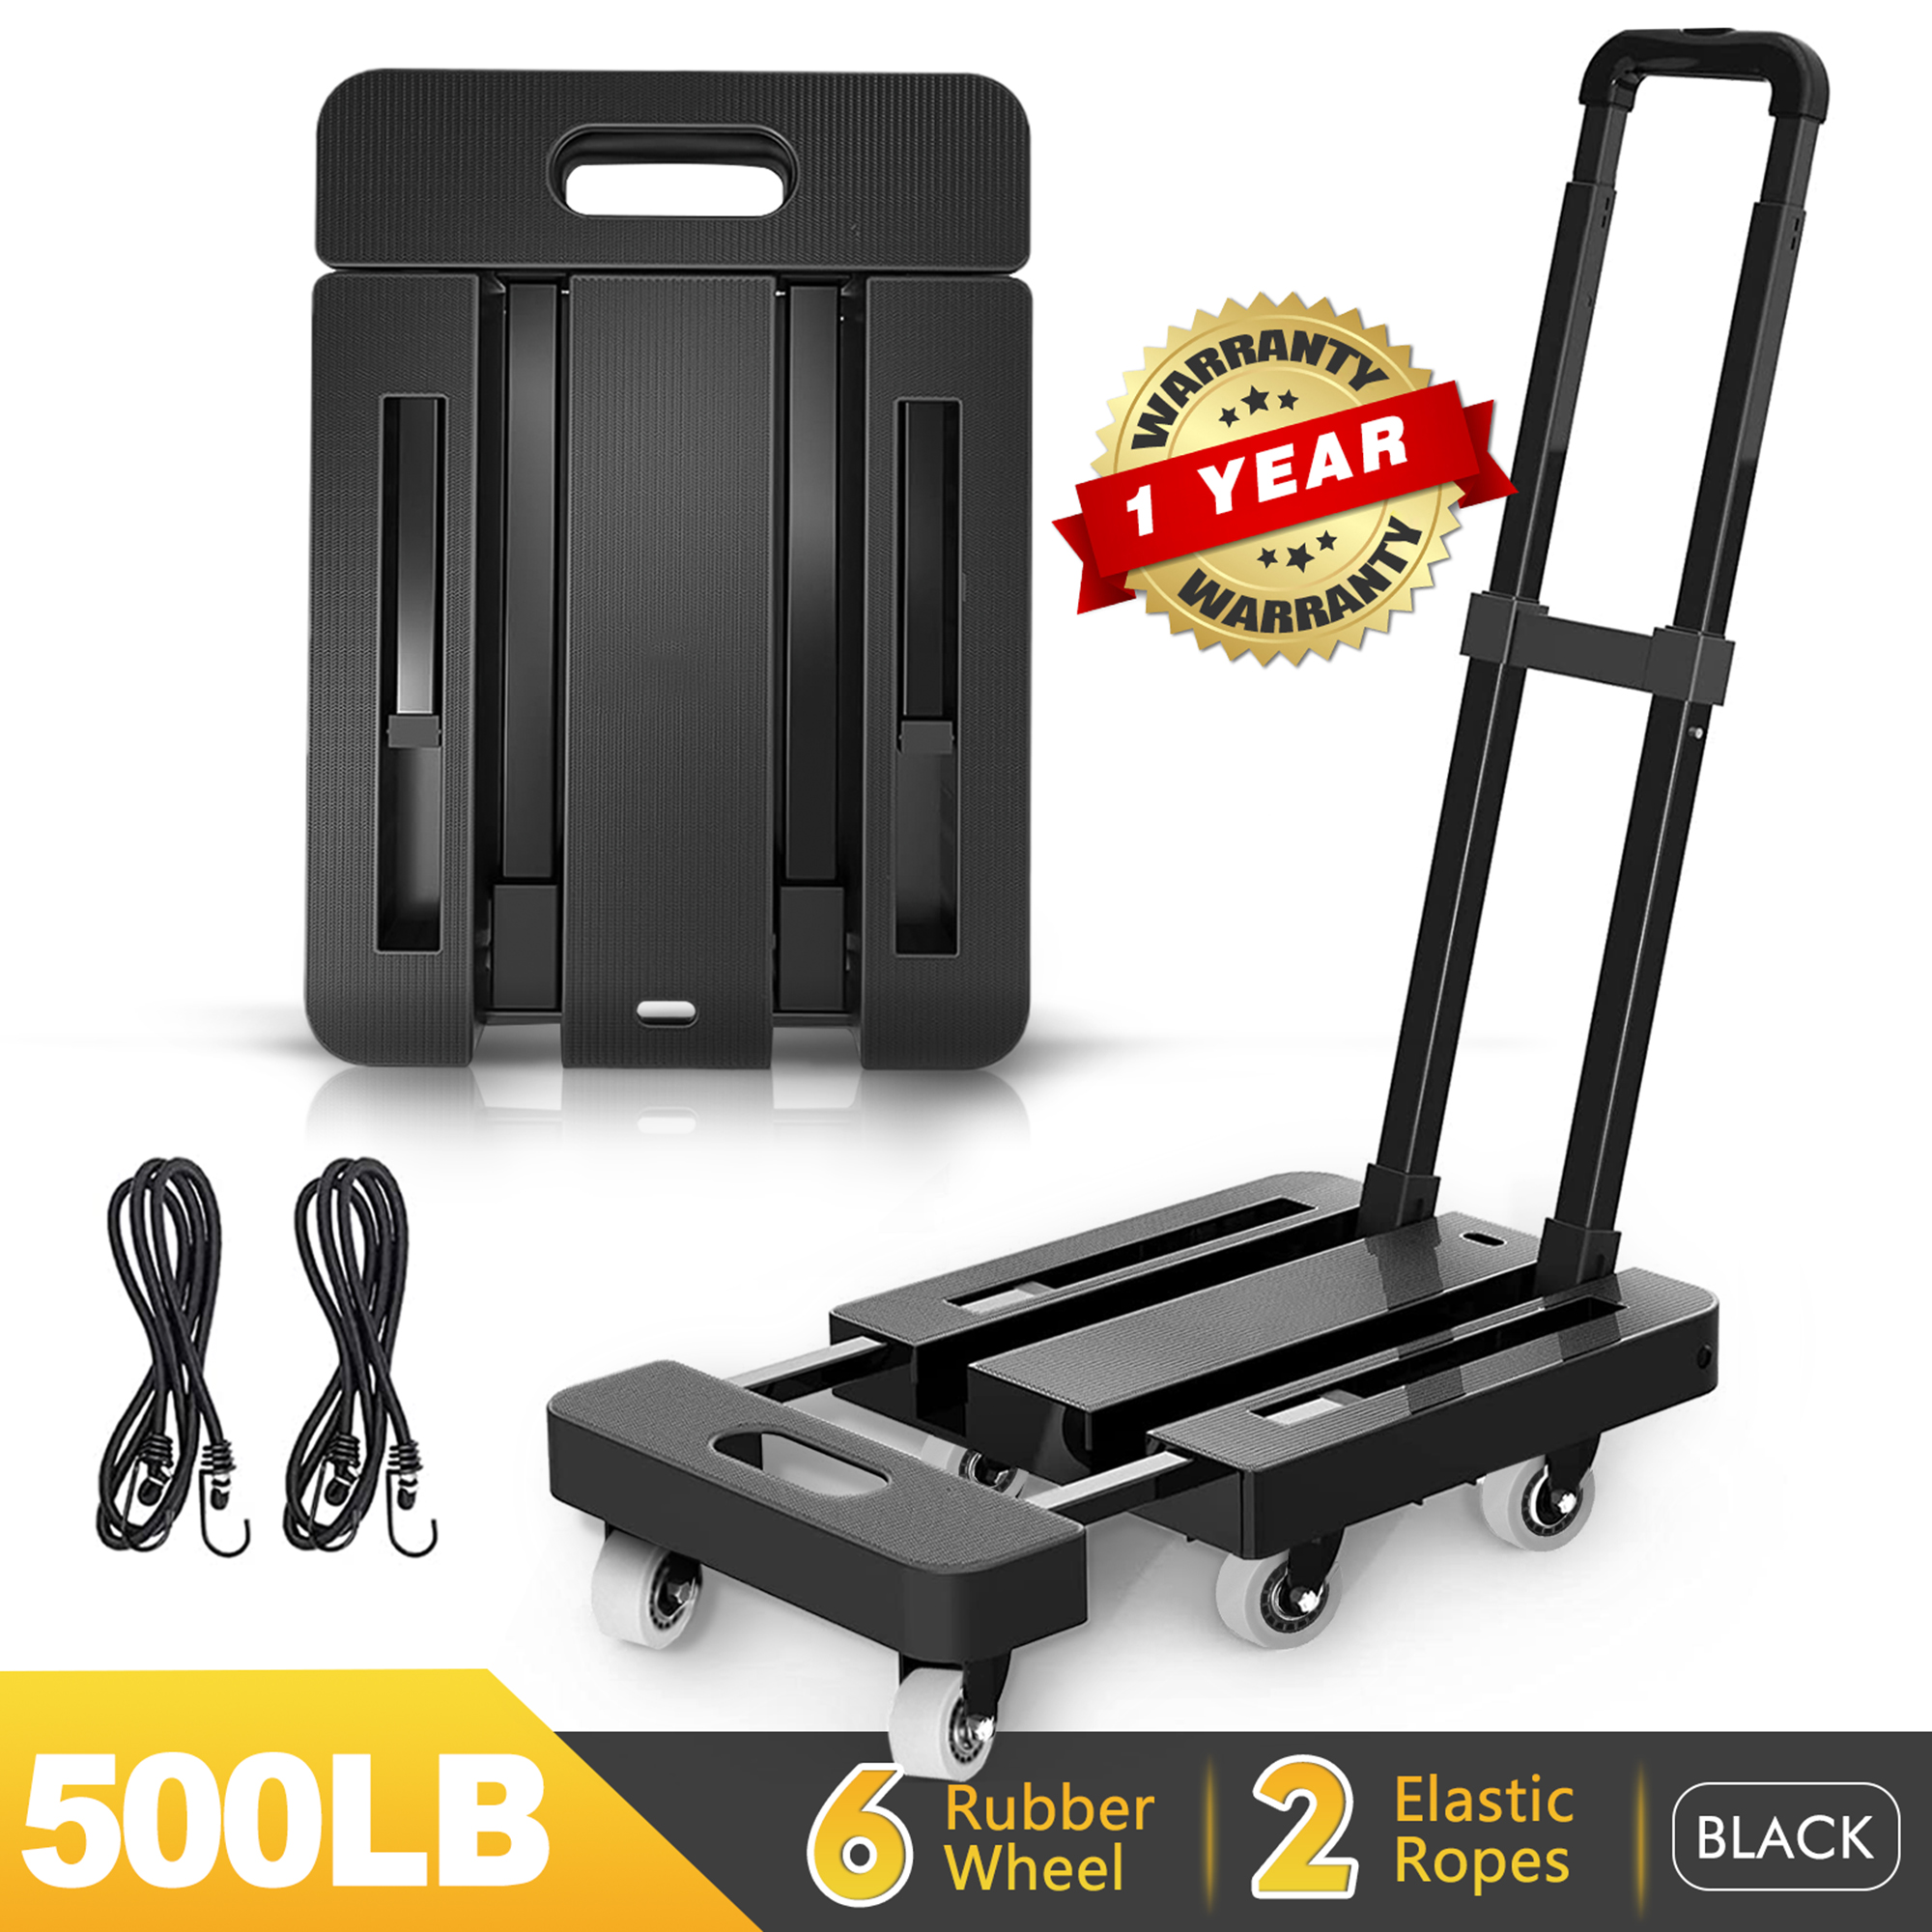 M BUDER Folding Hand Truck, 500 LBS Heavy Duty Dolly Cart, Utility Platform Cart with 6 Wheels for Travel, House, Office, Shopping, Moving Use - Black Folded Size is 11.8 x 17.7” - image 1 of 8